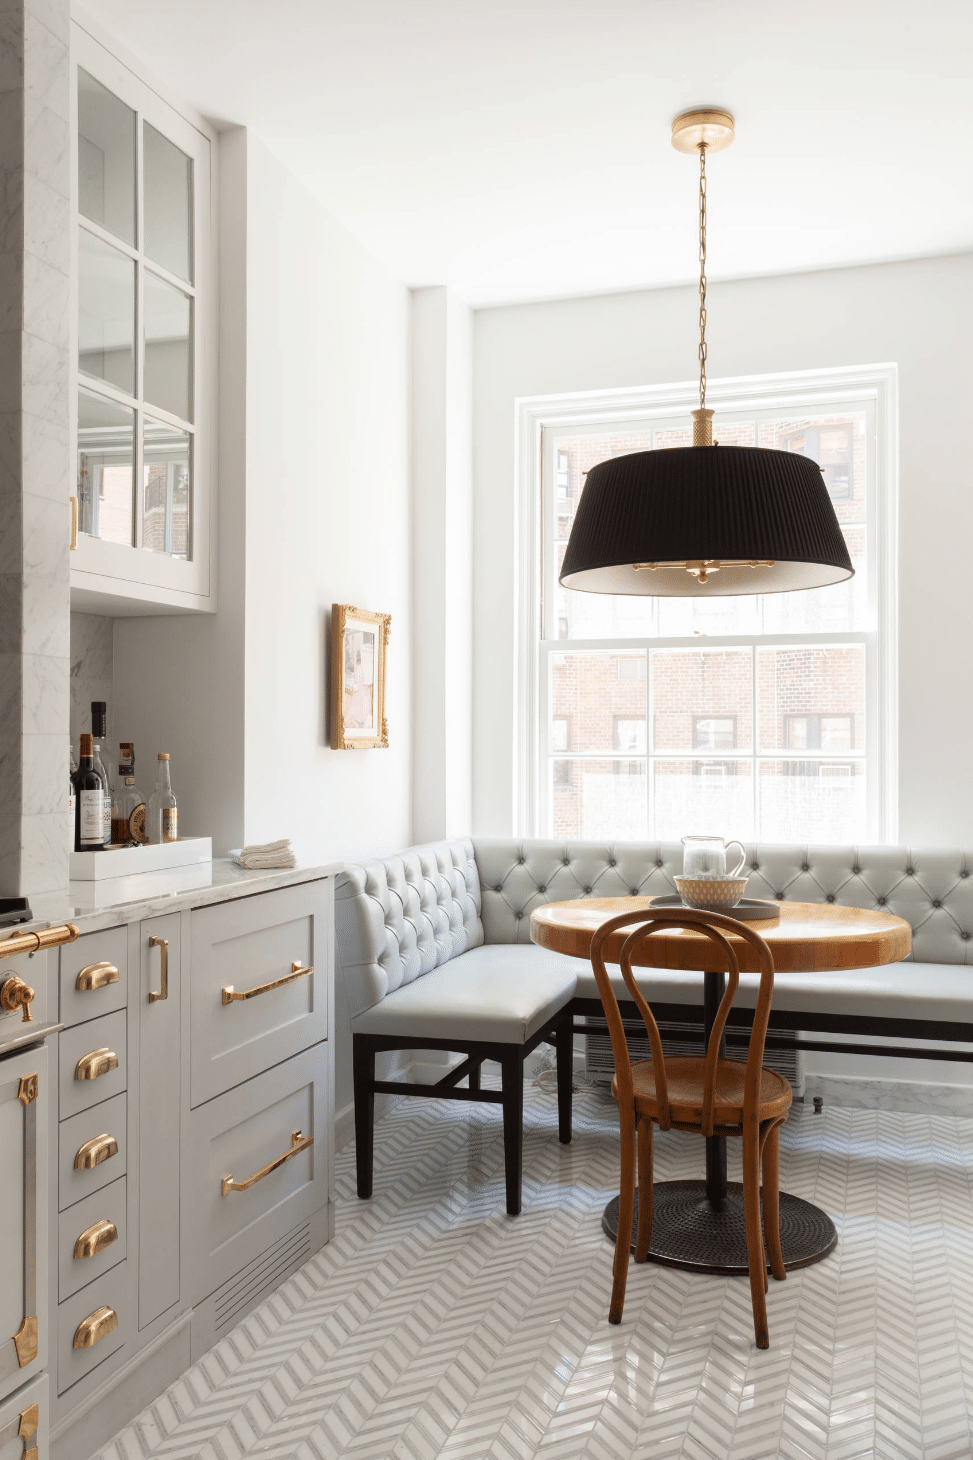 classic grey and white kitchen with brass hardware and black pendant in a gorgeous breakfast nook | via coco kelley